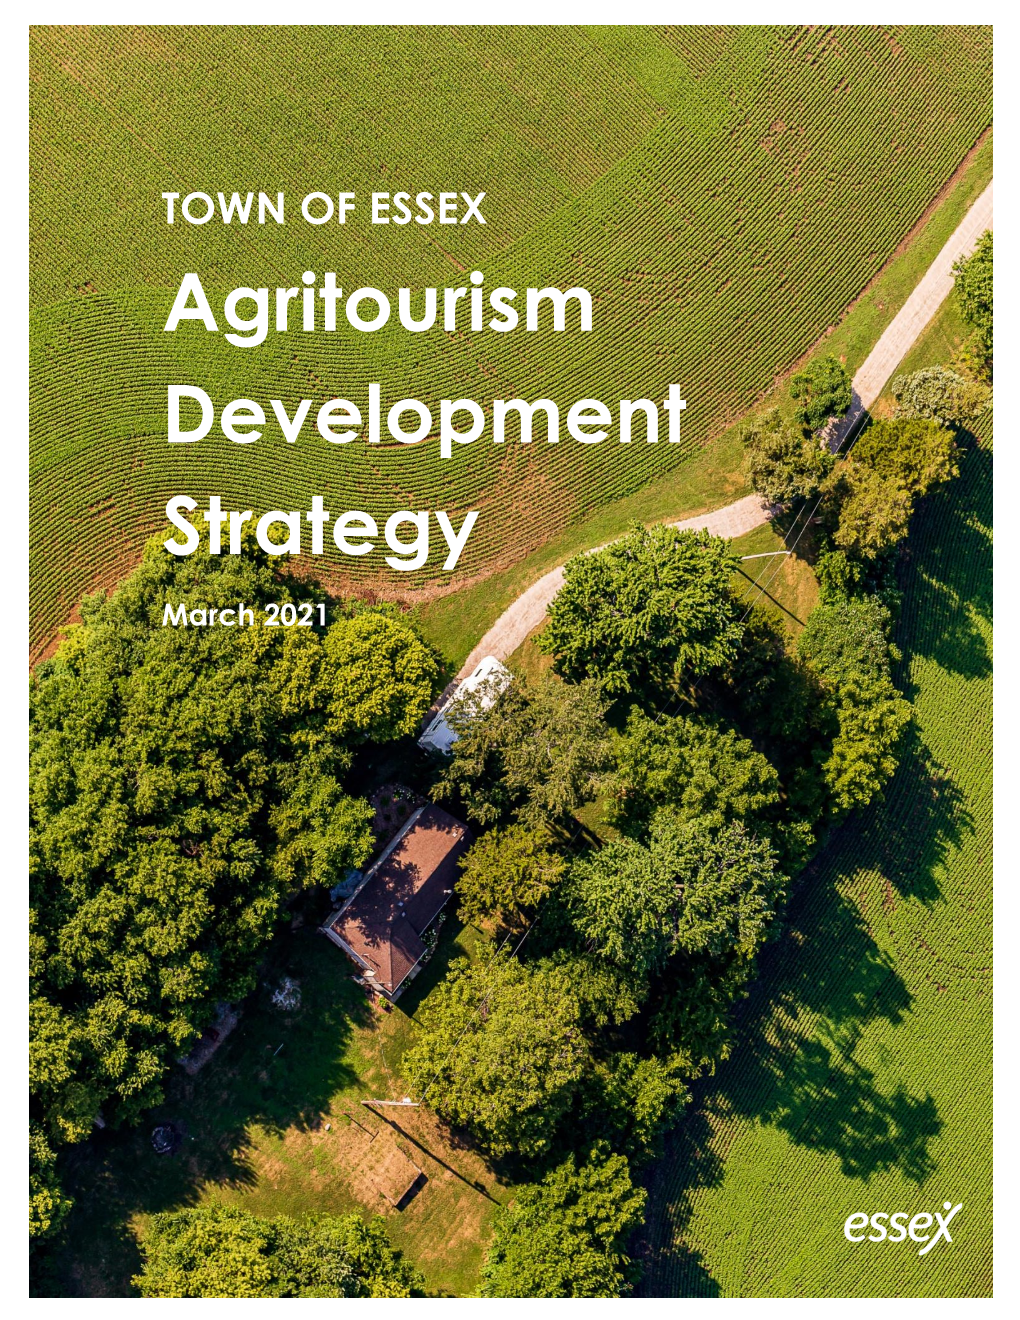 Agritourism Development Strategy March 2021 TOWN of ESSEX AGRITOURISM DEVELOPMENT STRATEGY March 2021